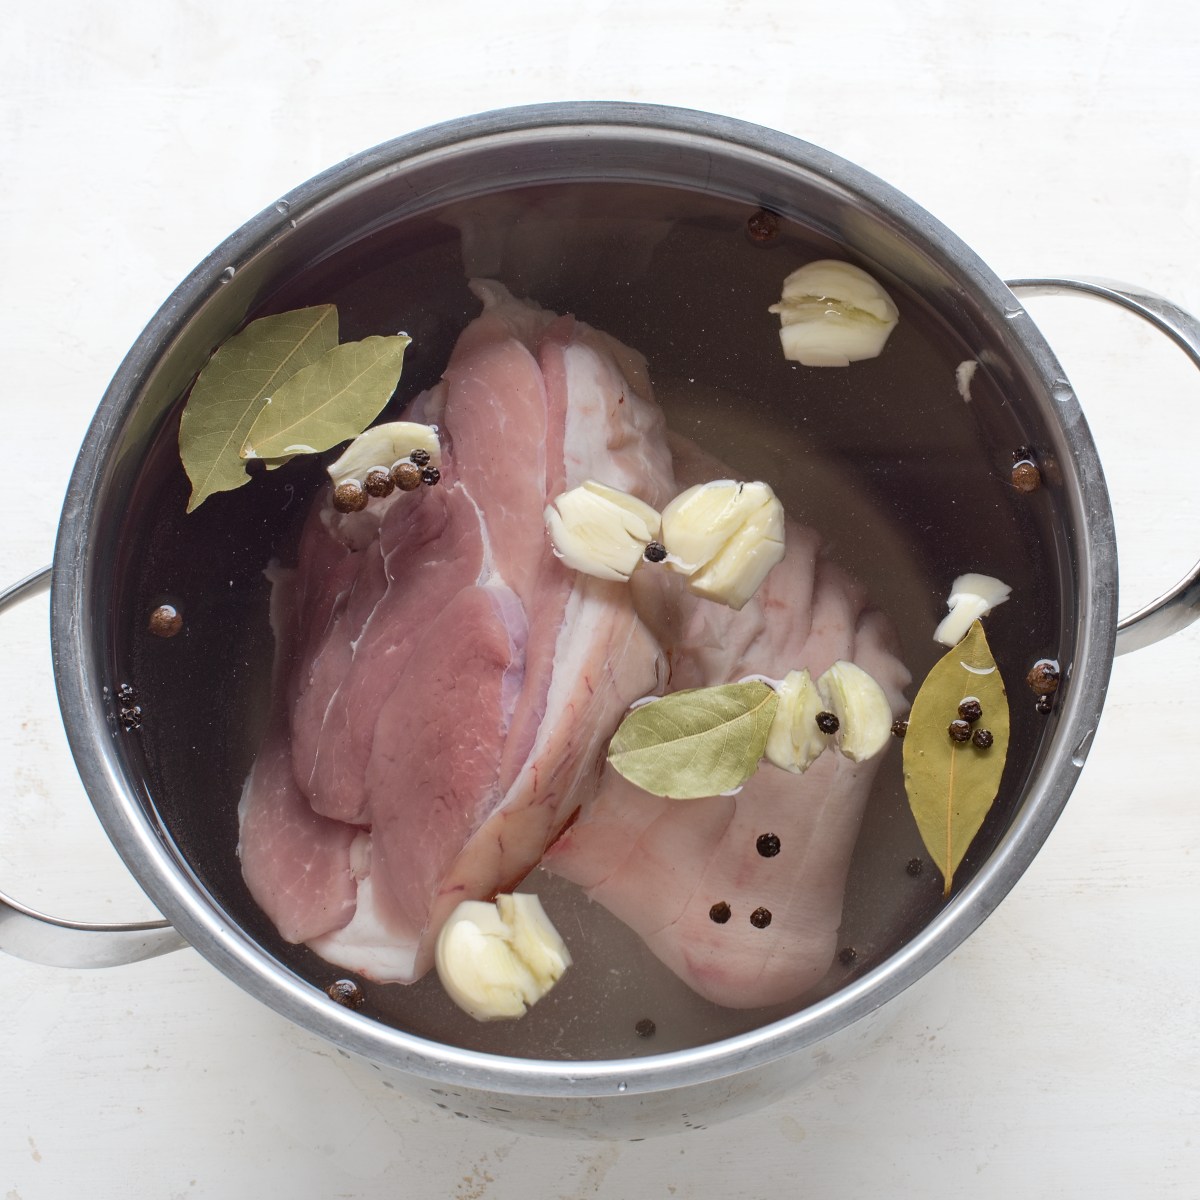 Pork knuckle in a pot of brine, seasoned with spices.